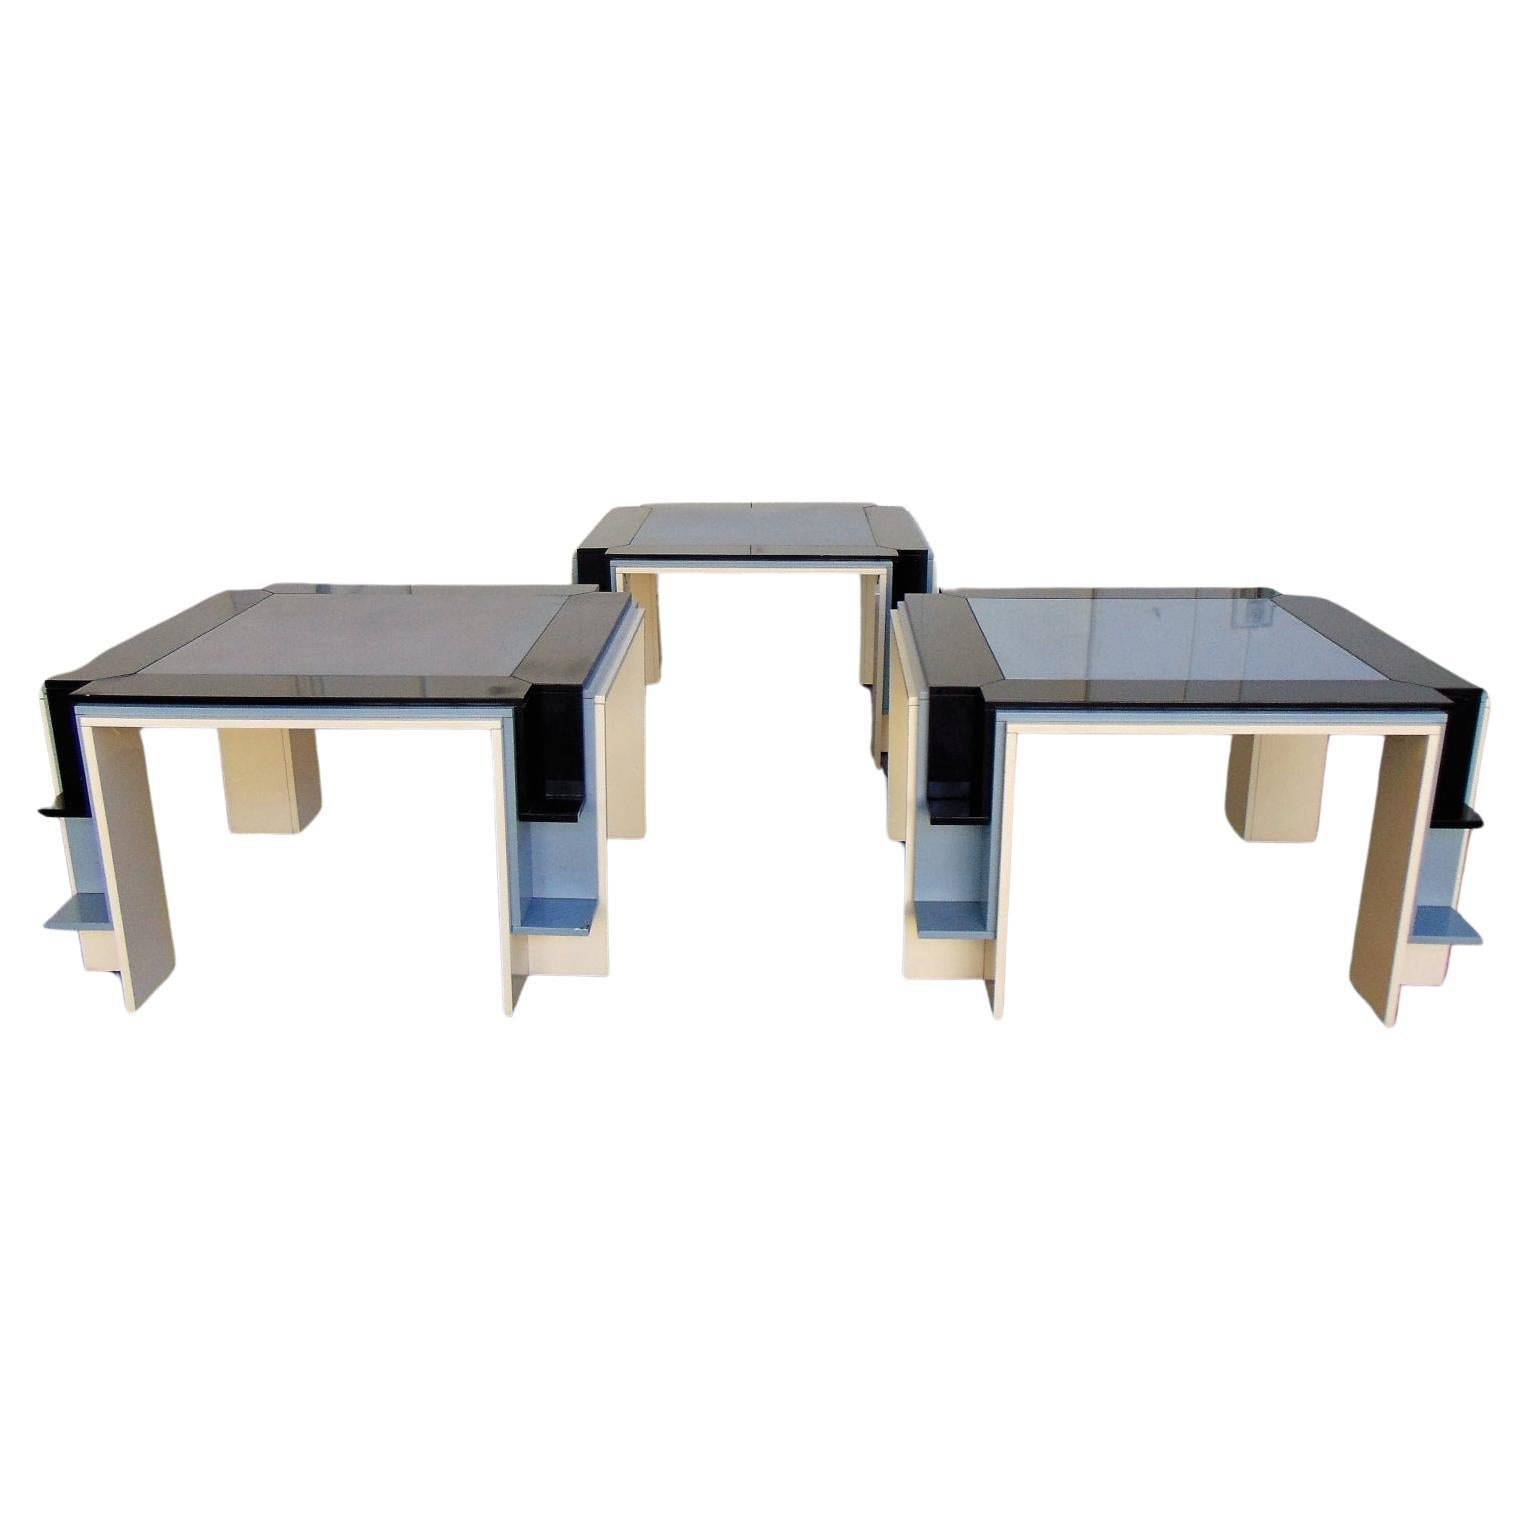 1986 Memphis Style Game and Dining Tables Glossy Black Gray Cream Lacquer For Sale